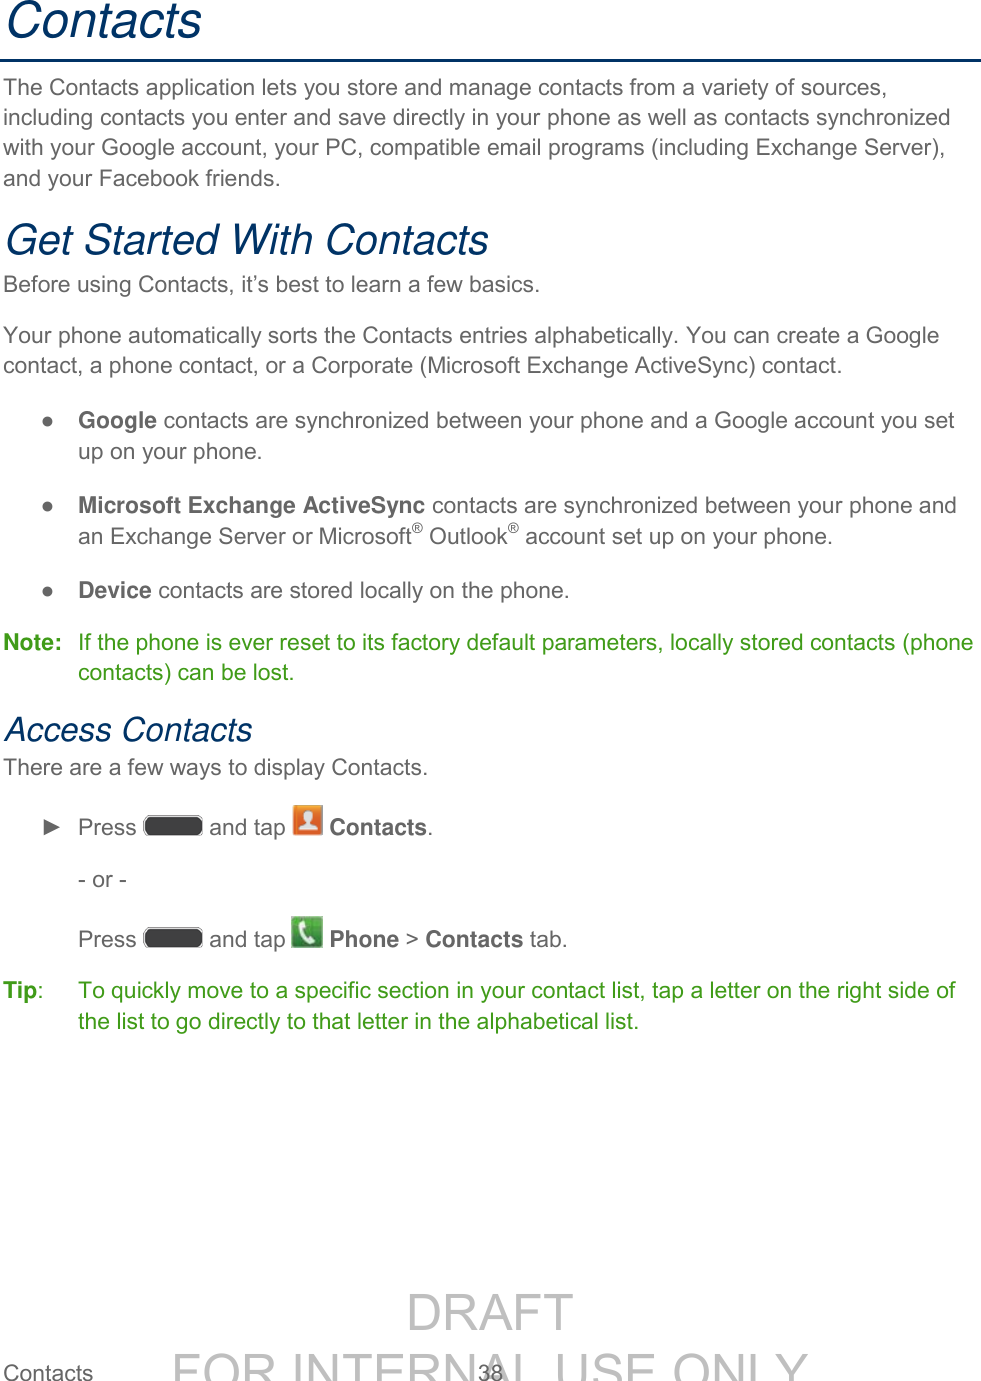 DRAFT FOR INTERNAL USE ONLY Contacts  38   Contacts The Contacts application lets you store and manage contacts from a variety of sources, including contacts you enter and save directly in your phone as well as contacts synchronized with your Google account, your PC, compatible email programs (including Exchange Server), and your Facebook friends. Get Started With Contacts Before using Contacts, it’s best to learn a few basics. Your phone automatically sorts the Contacts entries alphabetically. You can create a Google contact, a phone contact, or a Corporate (Microsoft Exchange ActiveSync) contact. ● Google contacts are synchronized between your phone and a Google account you set up on your phone. ● Microsoft Exchange ActiveSync contacts are synchronized between your phone and  an Exchange Server or Microsoft® Outlook® account set up on your phone. ● Device contacts are stored locally on the phone. Note:  If the phone is ever reset to its factory default parameters, locally stored contacts (phone contacts) can be lost. Access Contacts There are a few ways to display Contacts. ►  Press   and tap   Contacts. - or - Press   and tap   Phone &gt; Contacts tab. Tip:   To quickly move to a specific section in your contact list, tap a letter on the right side of the list to go directly to that letter in the alphabetical list. 